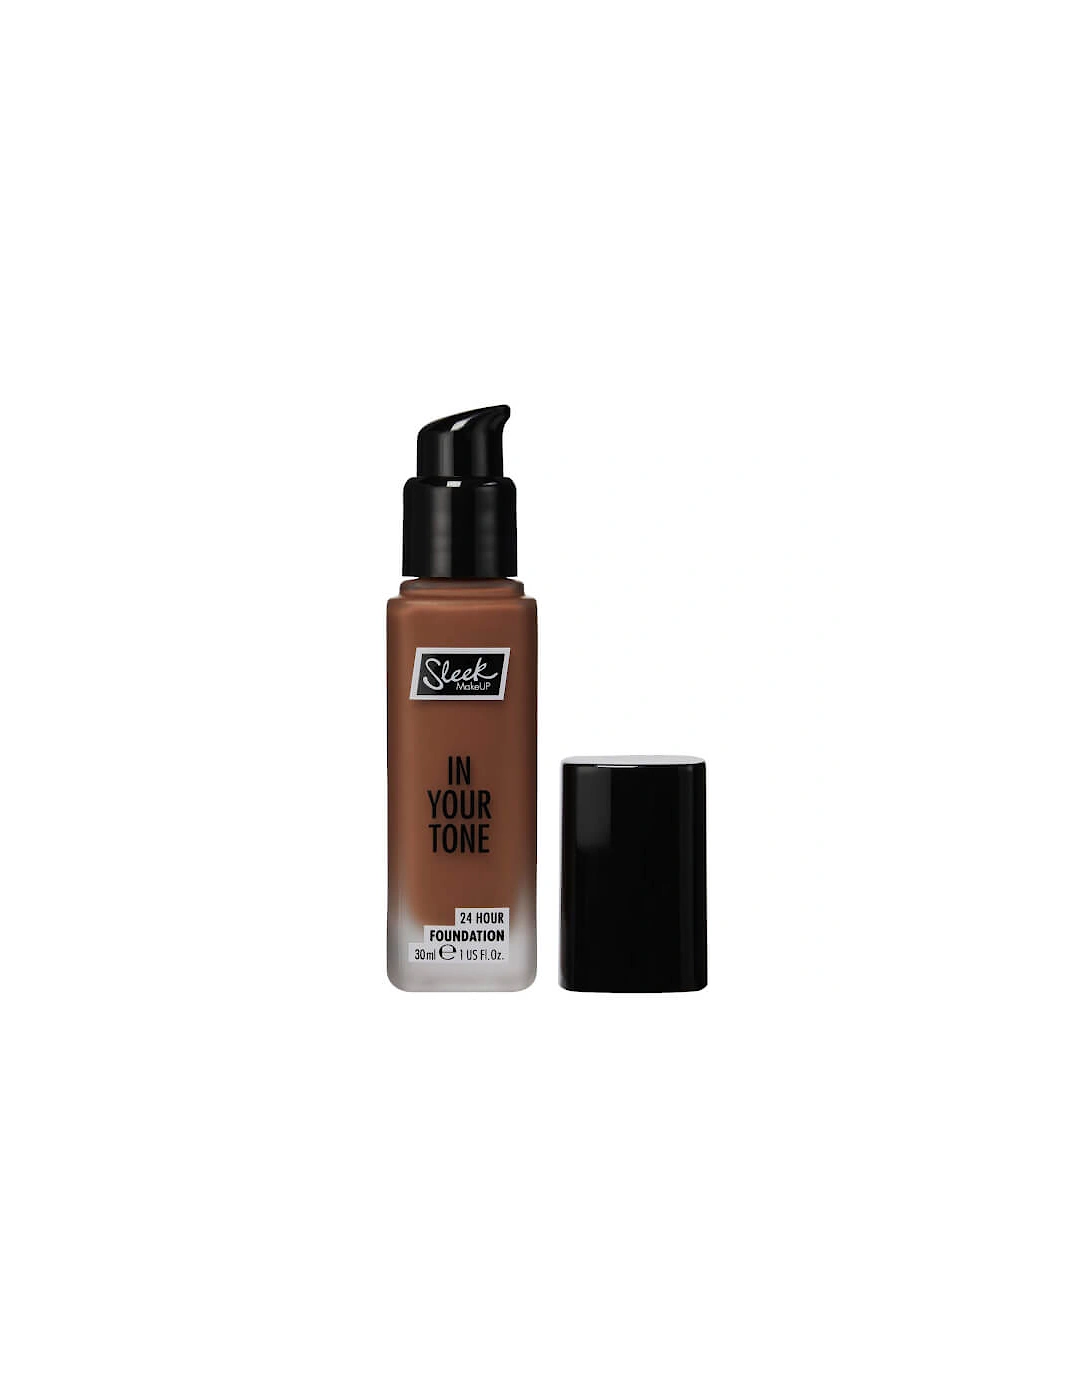 in Your Tone 24 Hour Foundation - 11C, 2 of 1